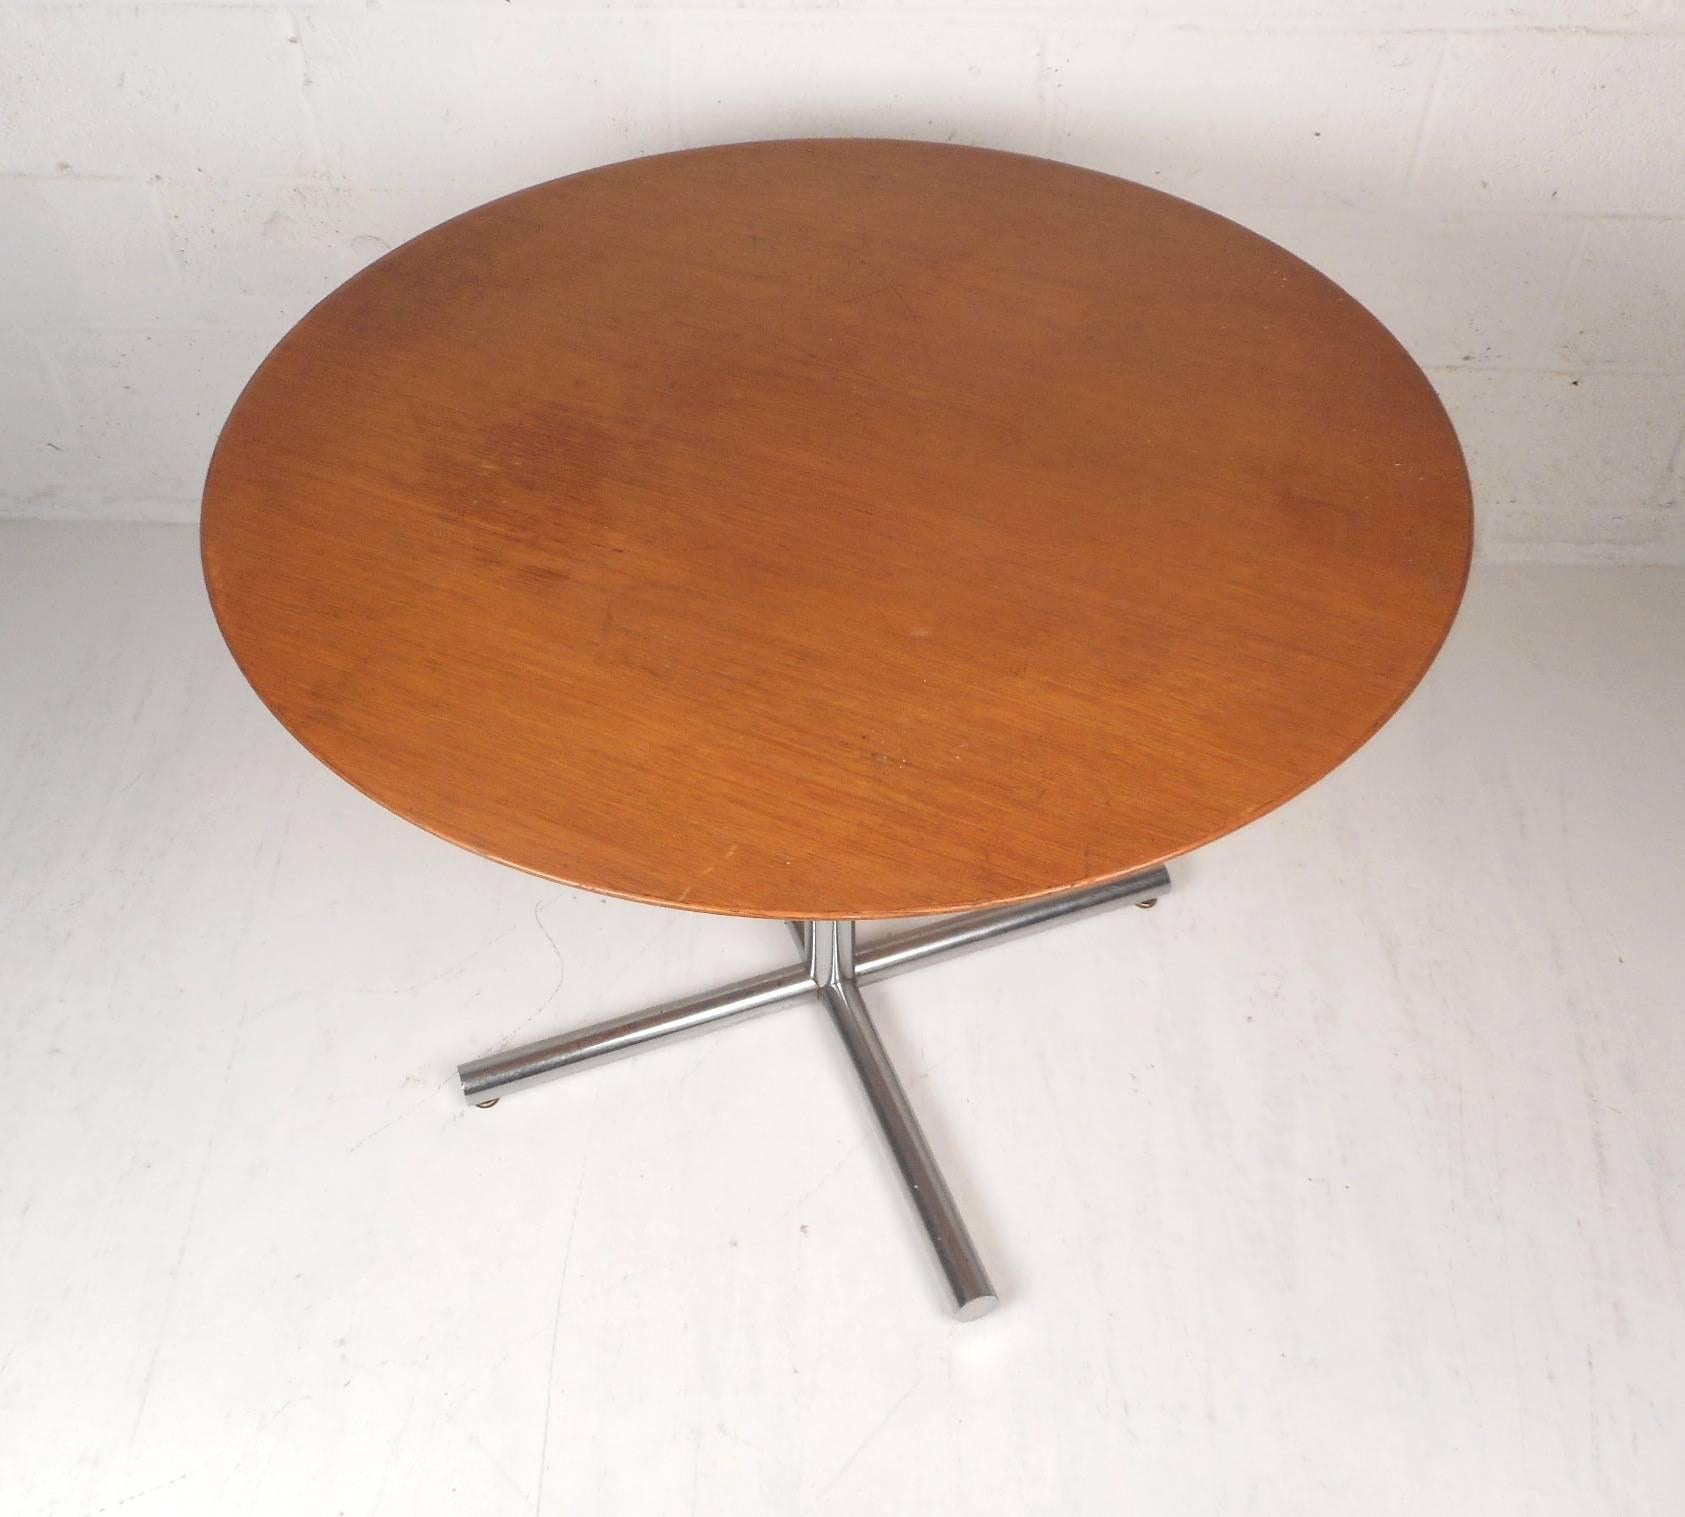 This unique vintage modern table functions as a kitchen table, a card table, or a dining table. Sleek design with gorgeous wood grain on the top and a heavy chrome base. This wonderful midcentury piece has one large cylindrical chrome support